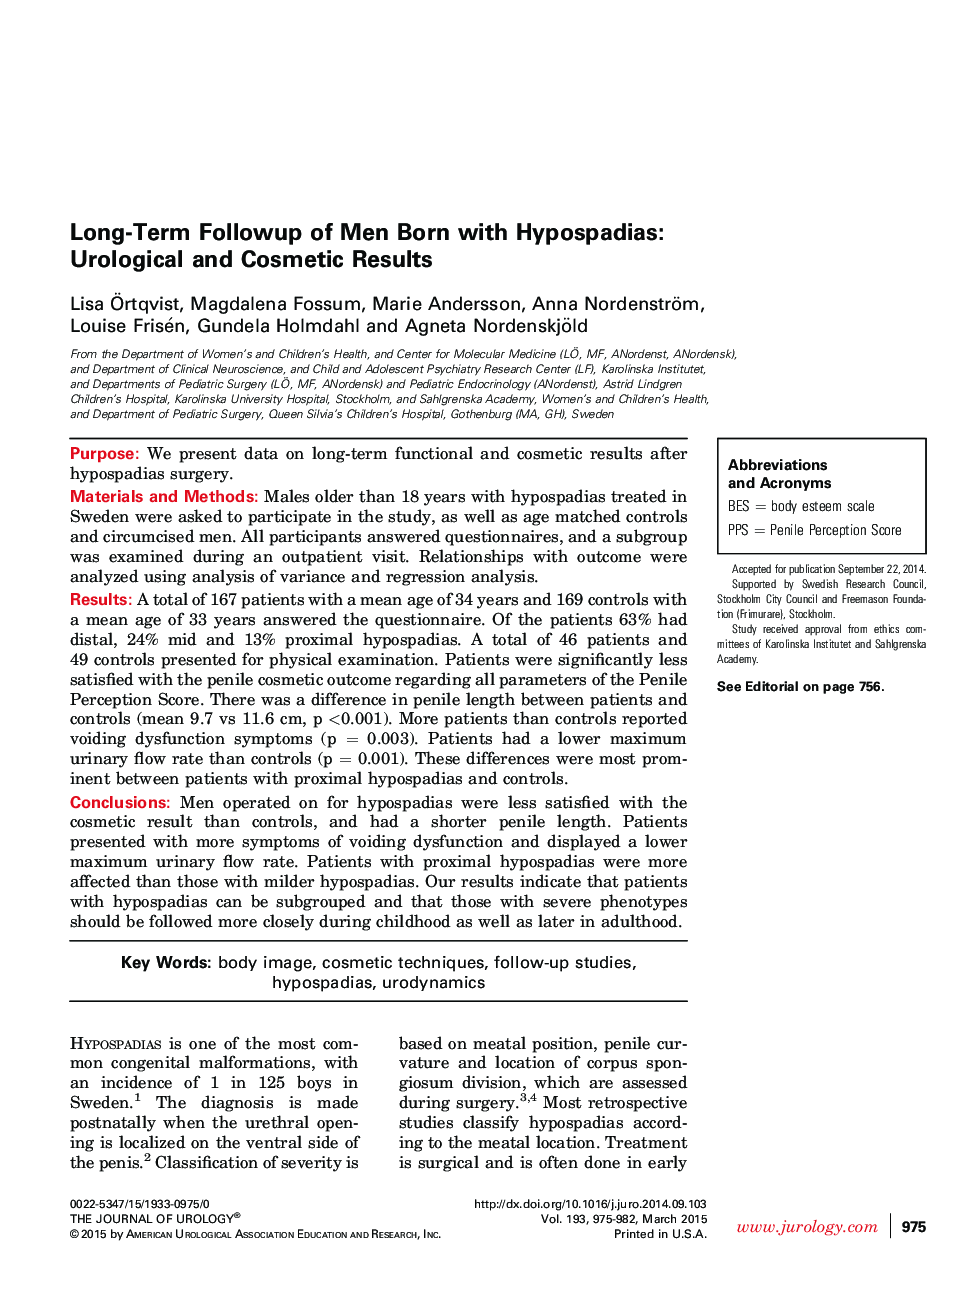 Long-Term Followup of Men Born with Hypospadias: Urological and Cosmetic Results 